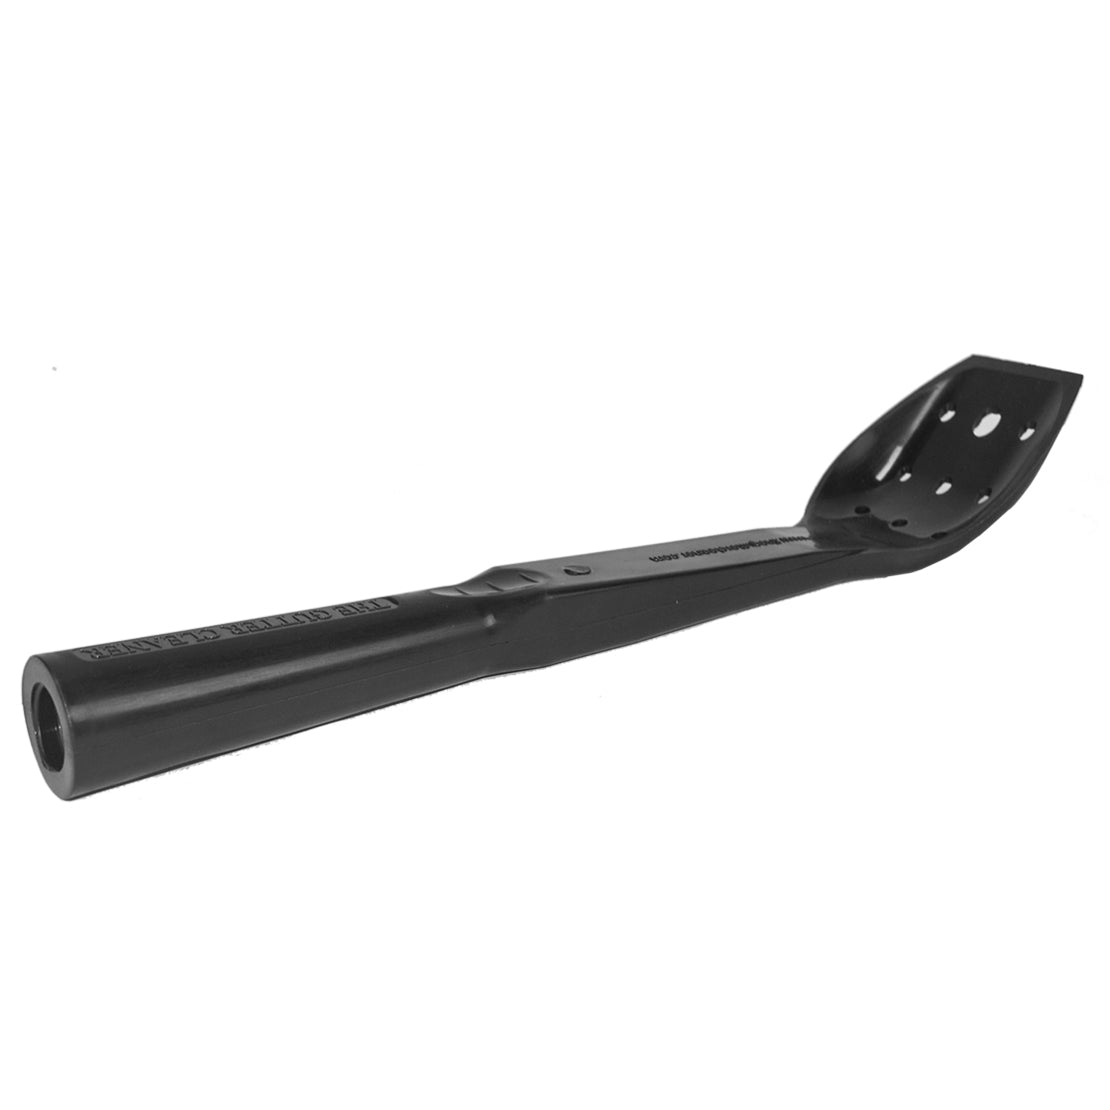 Gutter Tool Spoon - Right Side View